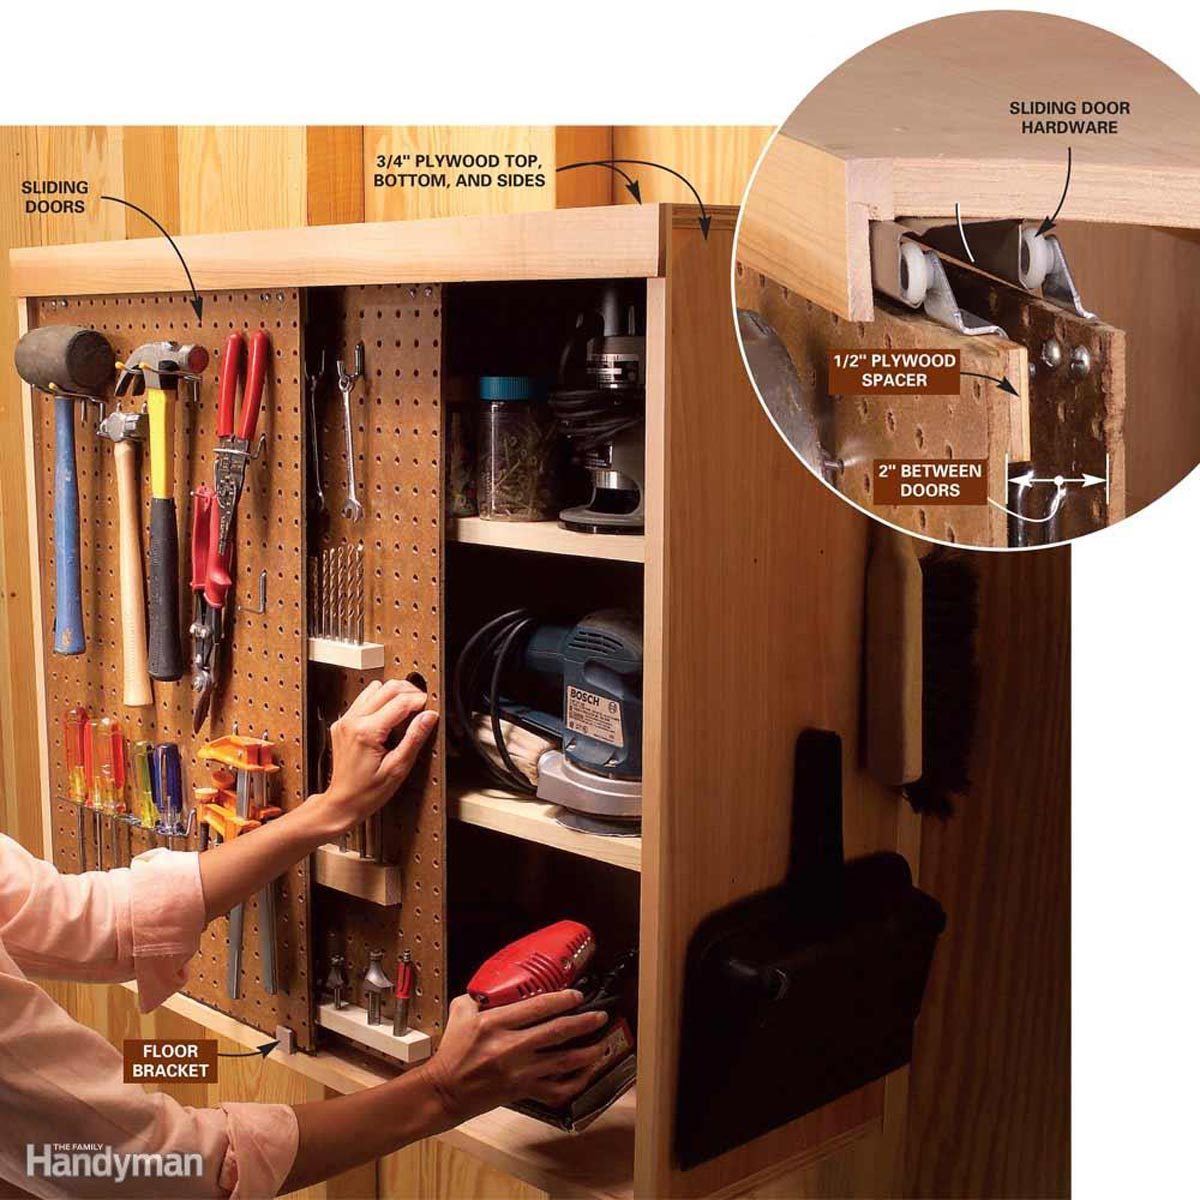 Hardware Storage: DIY Tips and Hints